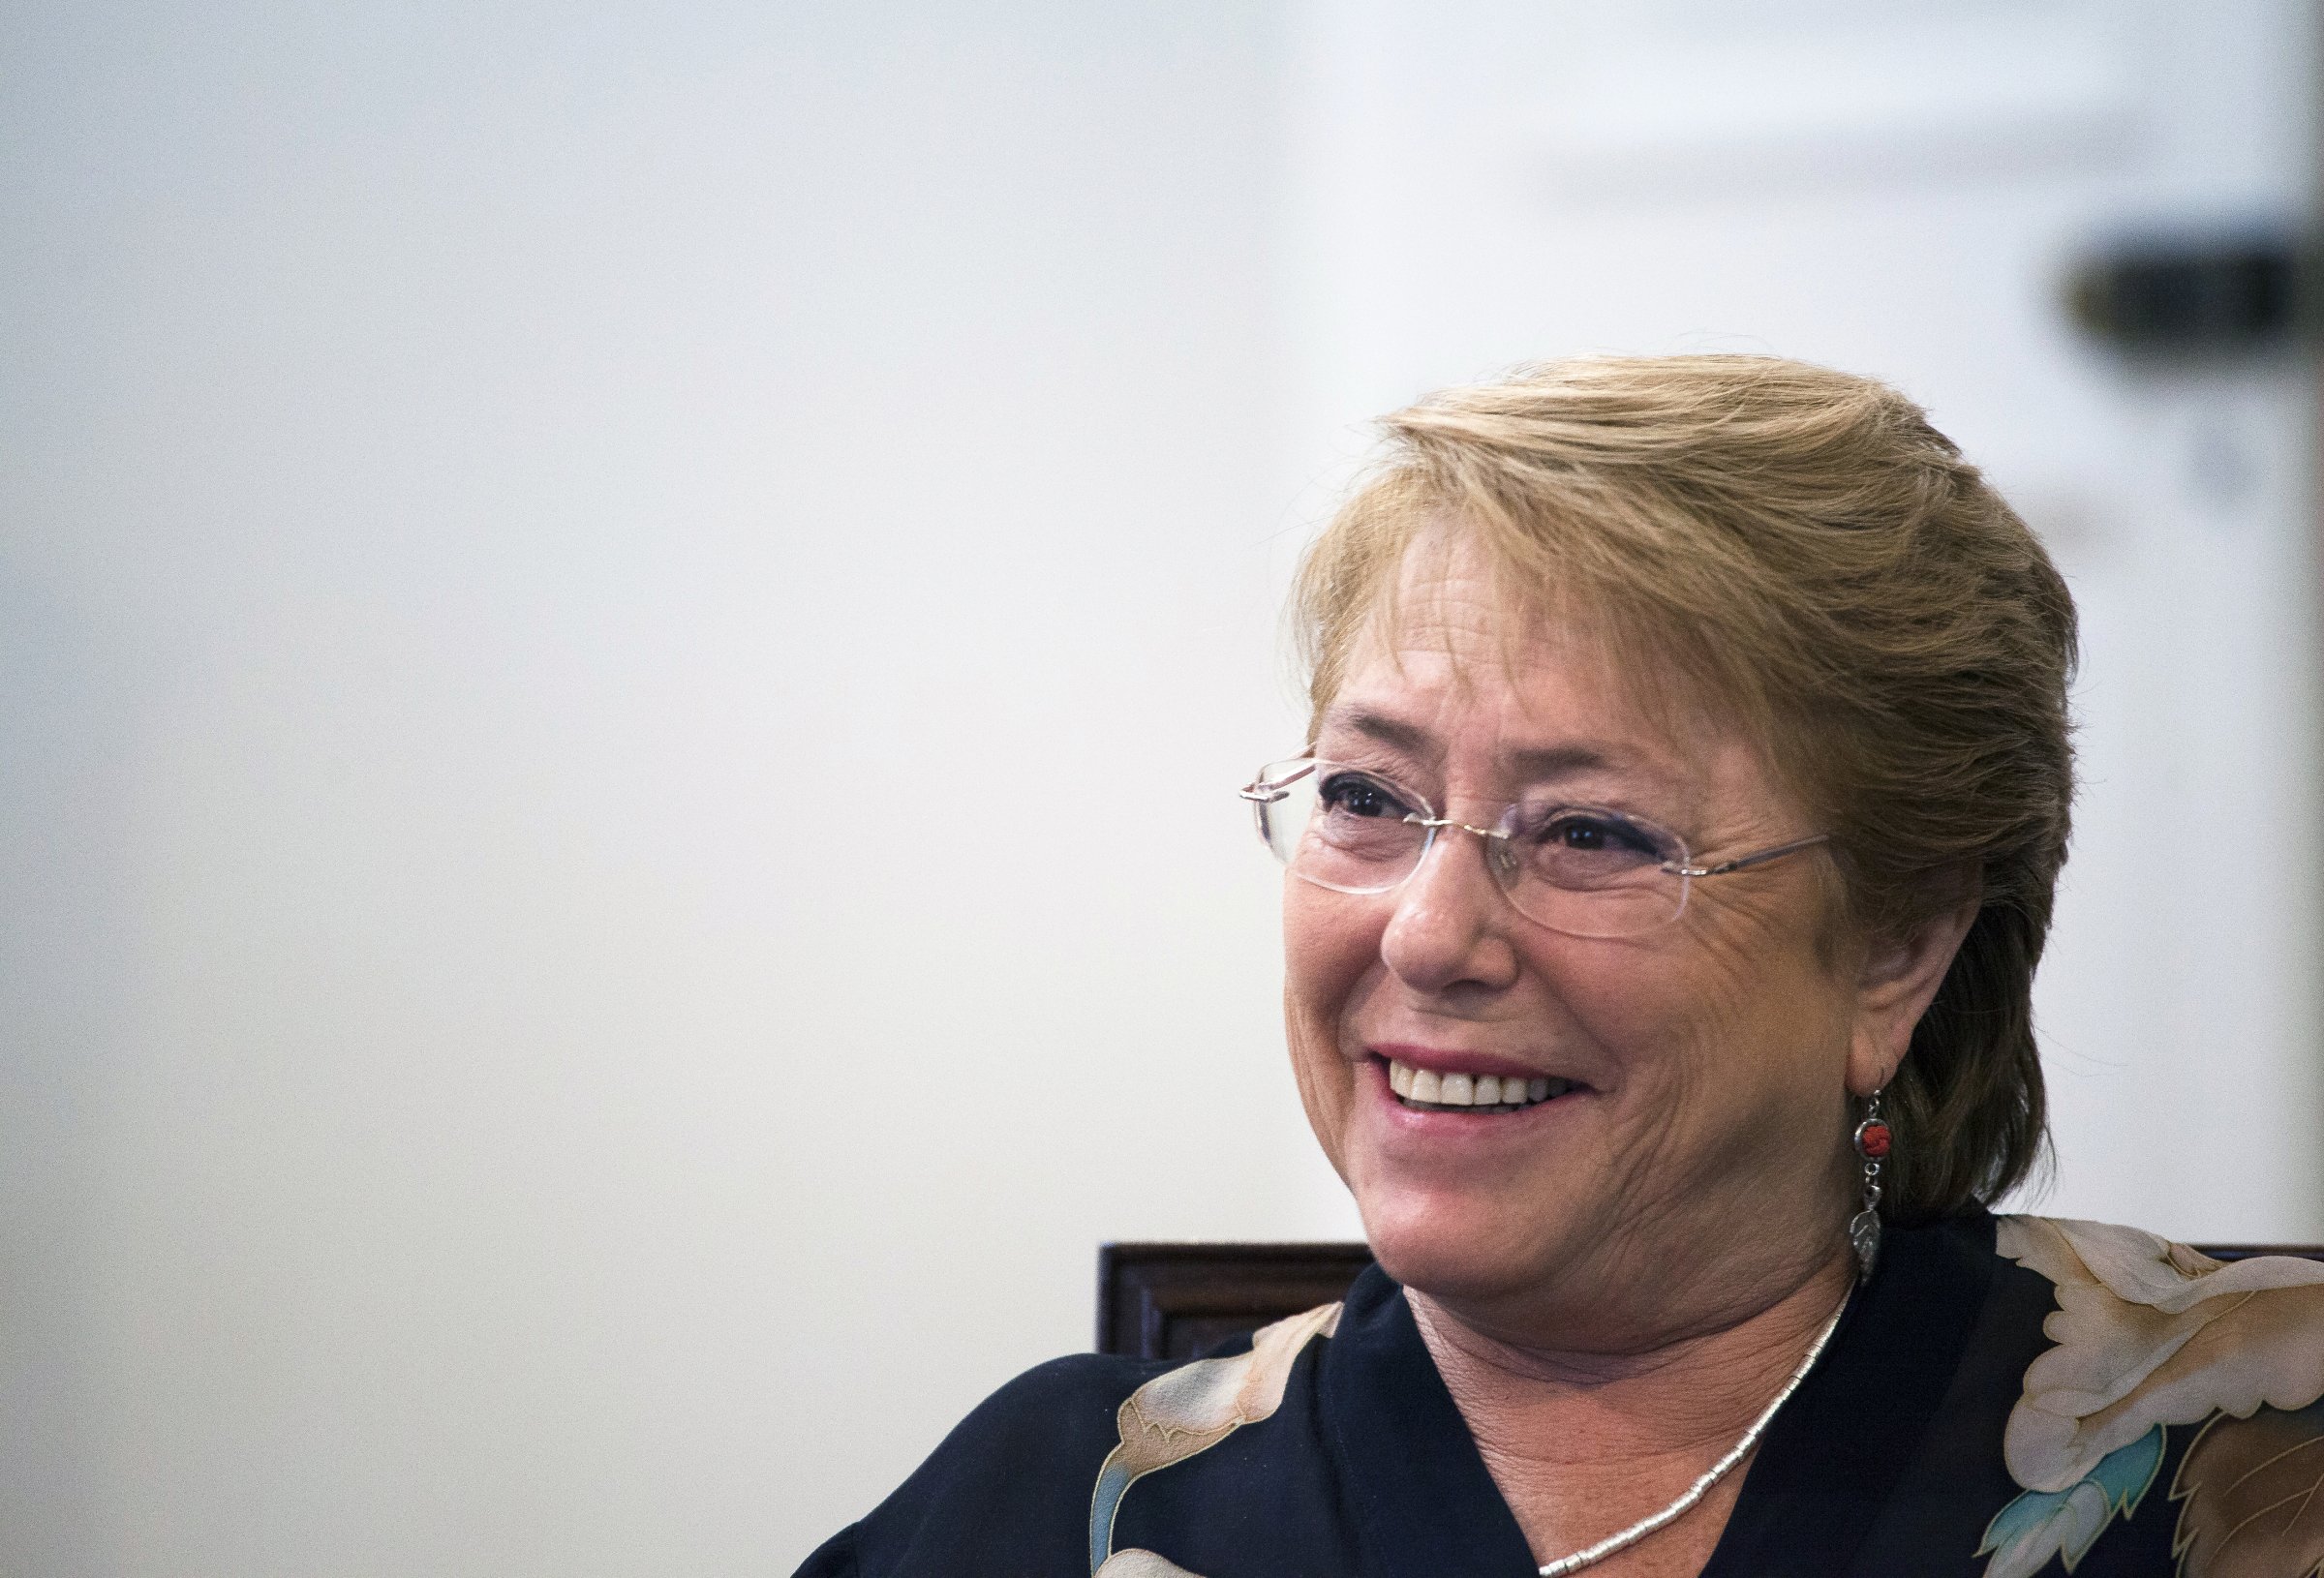 Michelle Bachelet, president of Chile, smiles during an interview at La Moneda Palace in Santiago, Chile, on Friday, Jan. 20, 2017.